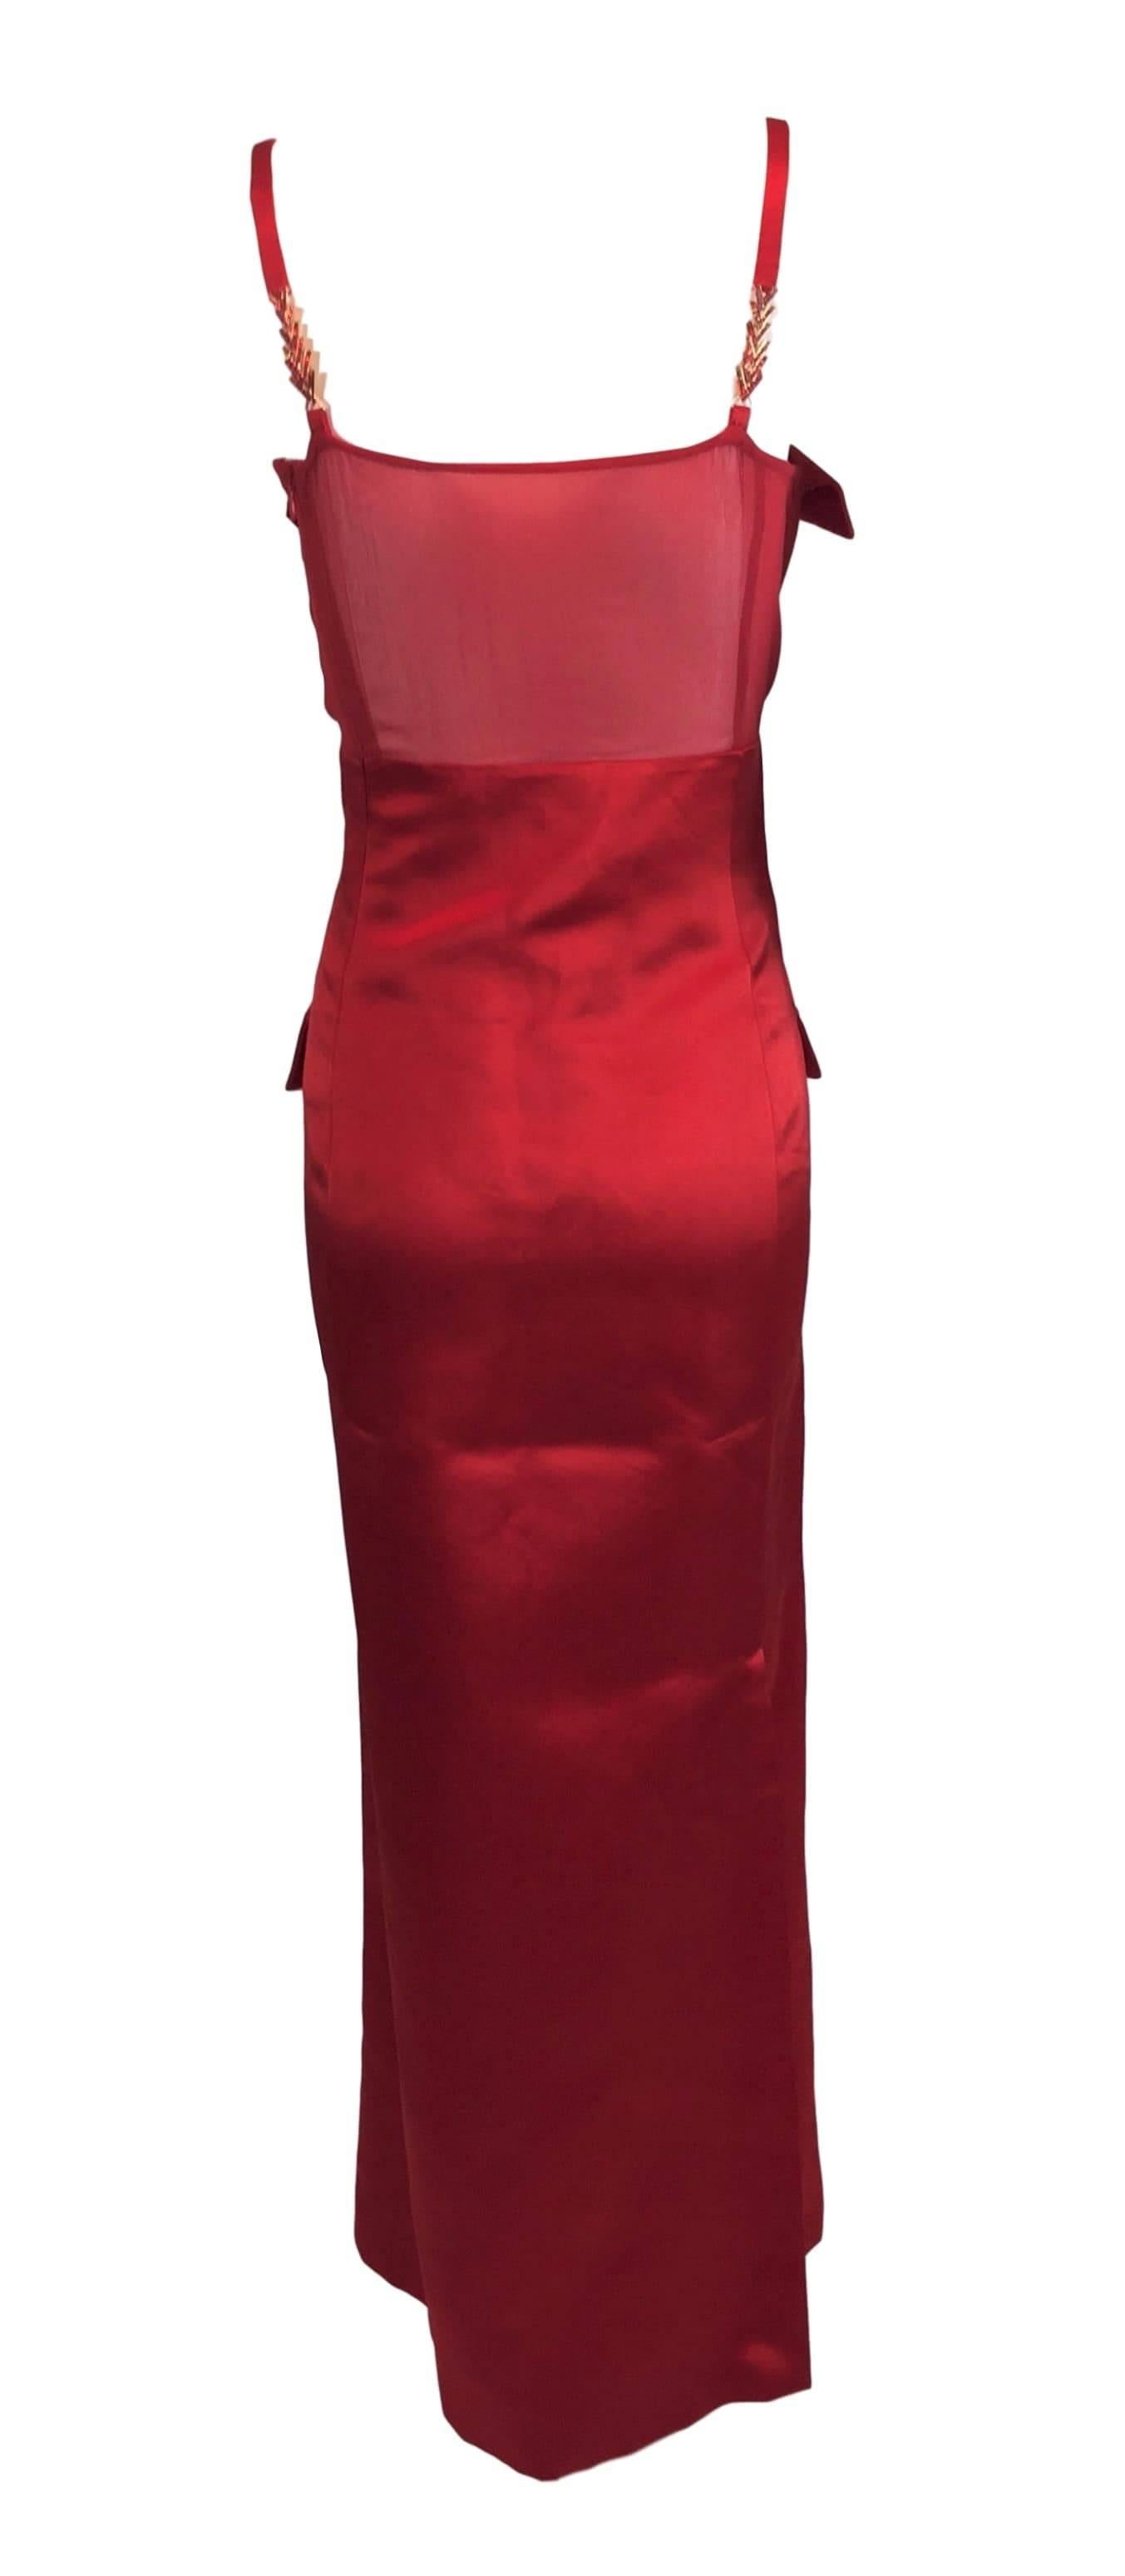 F/W 1996 Gianni Versace Runway Red Sheer Silk Gown Dress In Good Condition In Yukon, OK